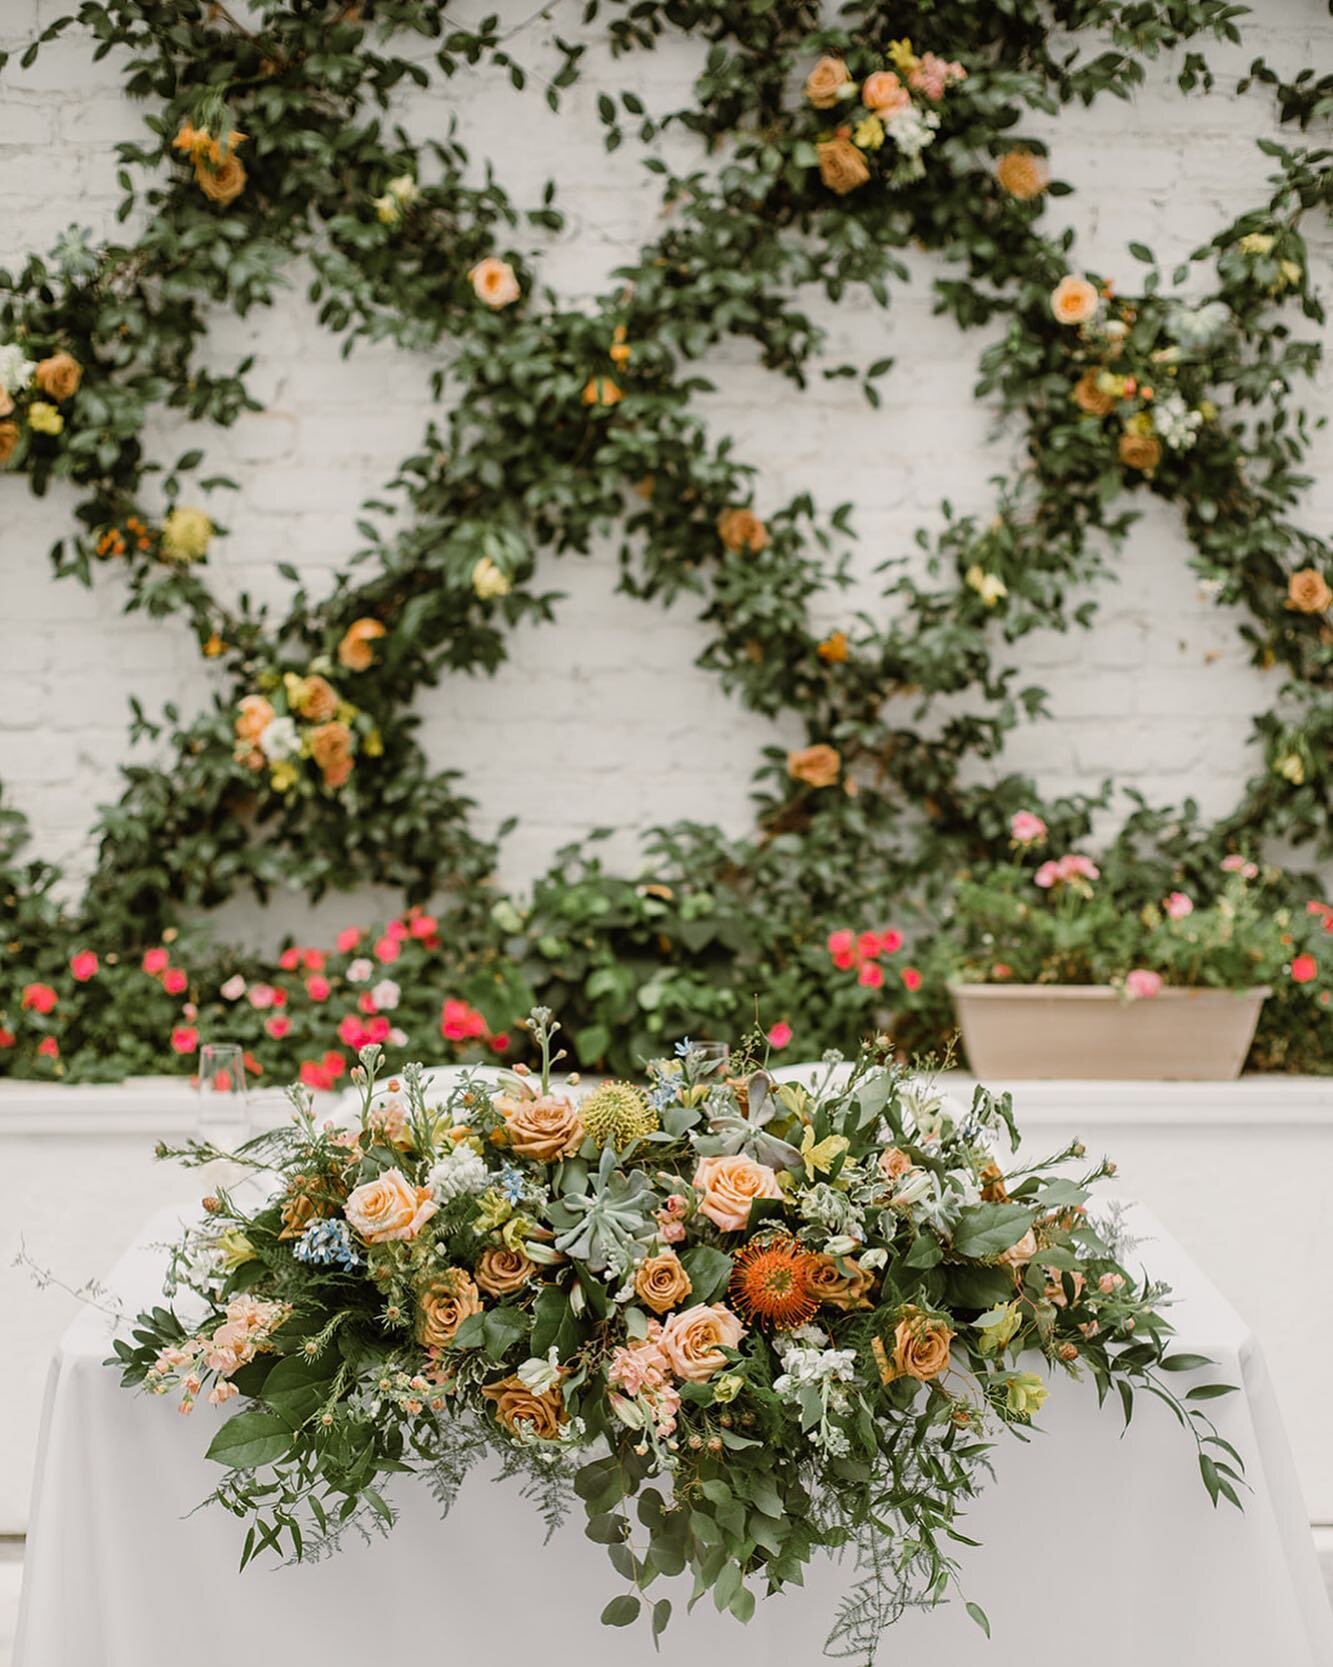 A question we ask in every consultation - sweetheart table or head table? Emily + Matt&rsquo;s sweetheart table from their intimate Quirk wedding this past weekend are what botanical dreams are made of 🌿💛
.
.⁠
.⁠⠀⁠⠀
🌸: @weddingsbyvogue 
📸: @sarah